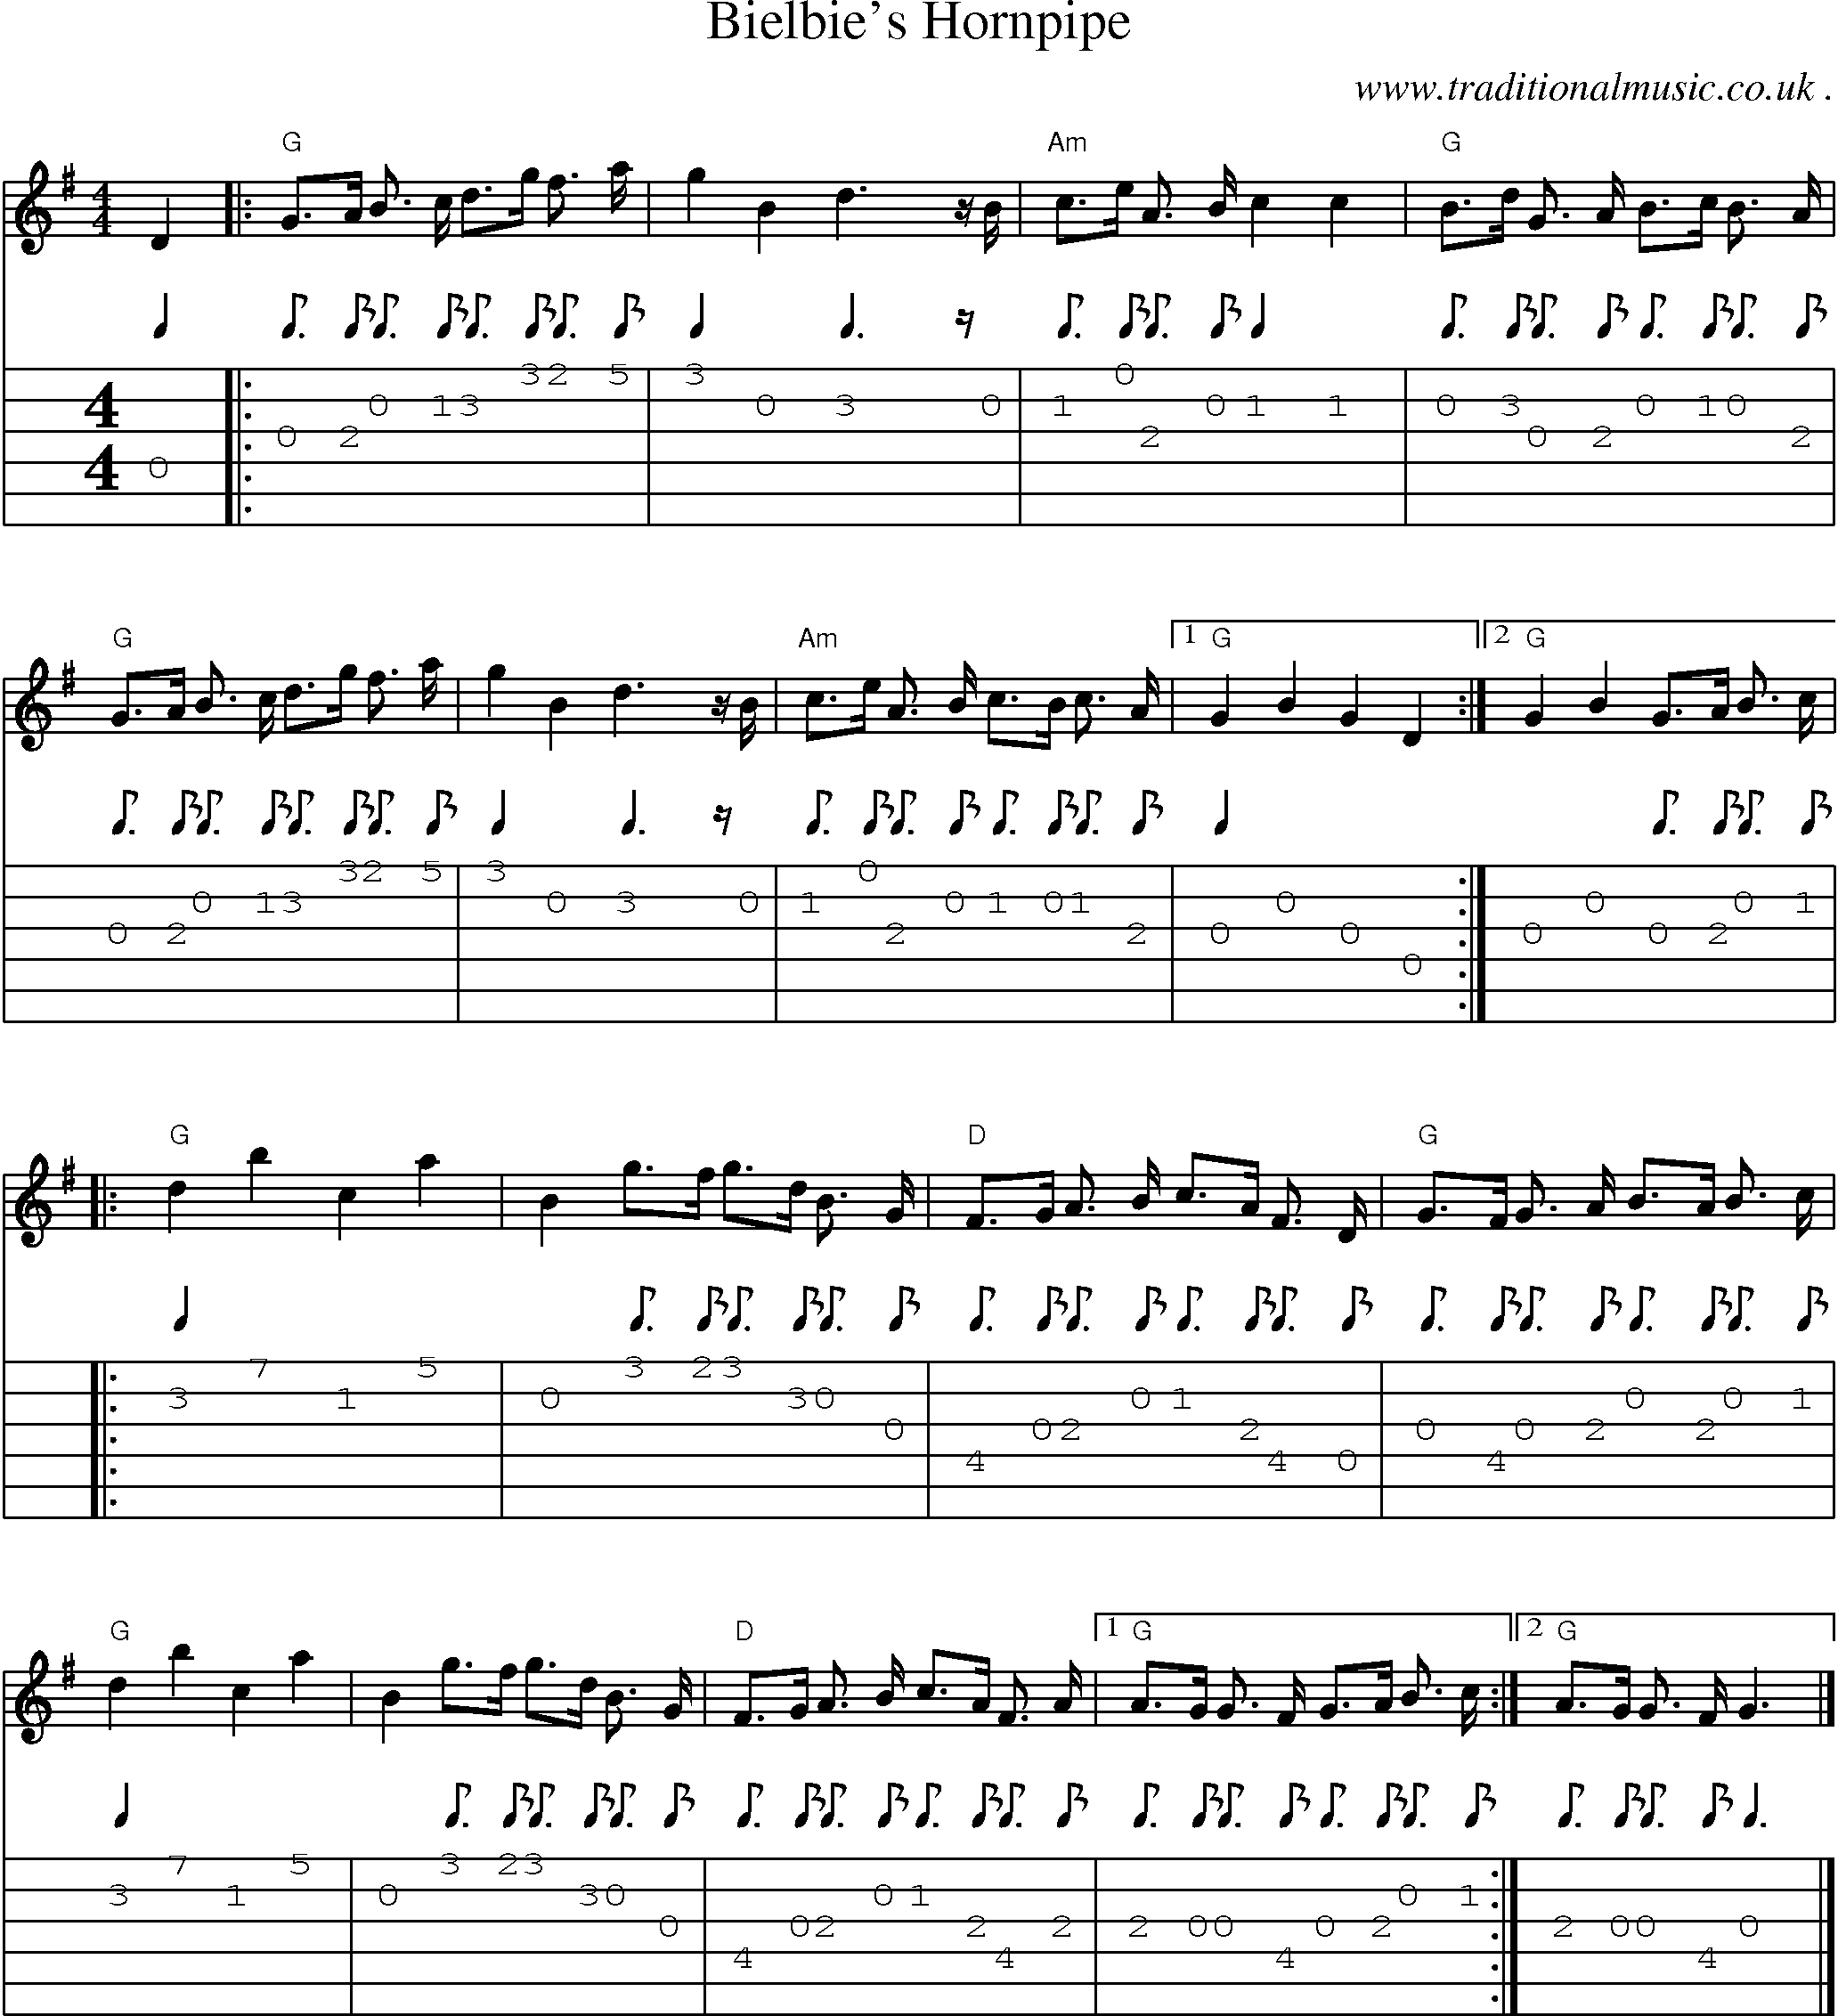 Music Score and Guitar Tabs for Bielbies Hornpipe